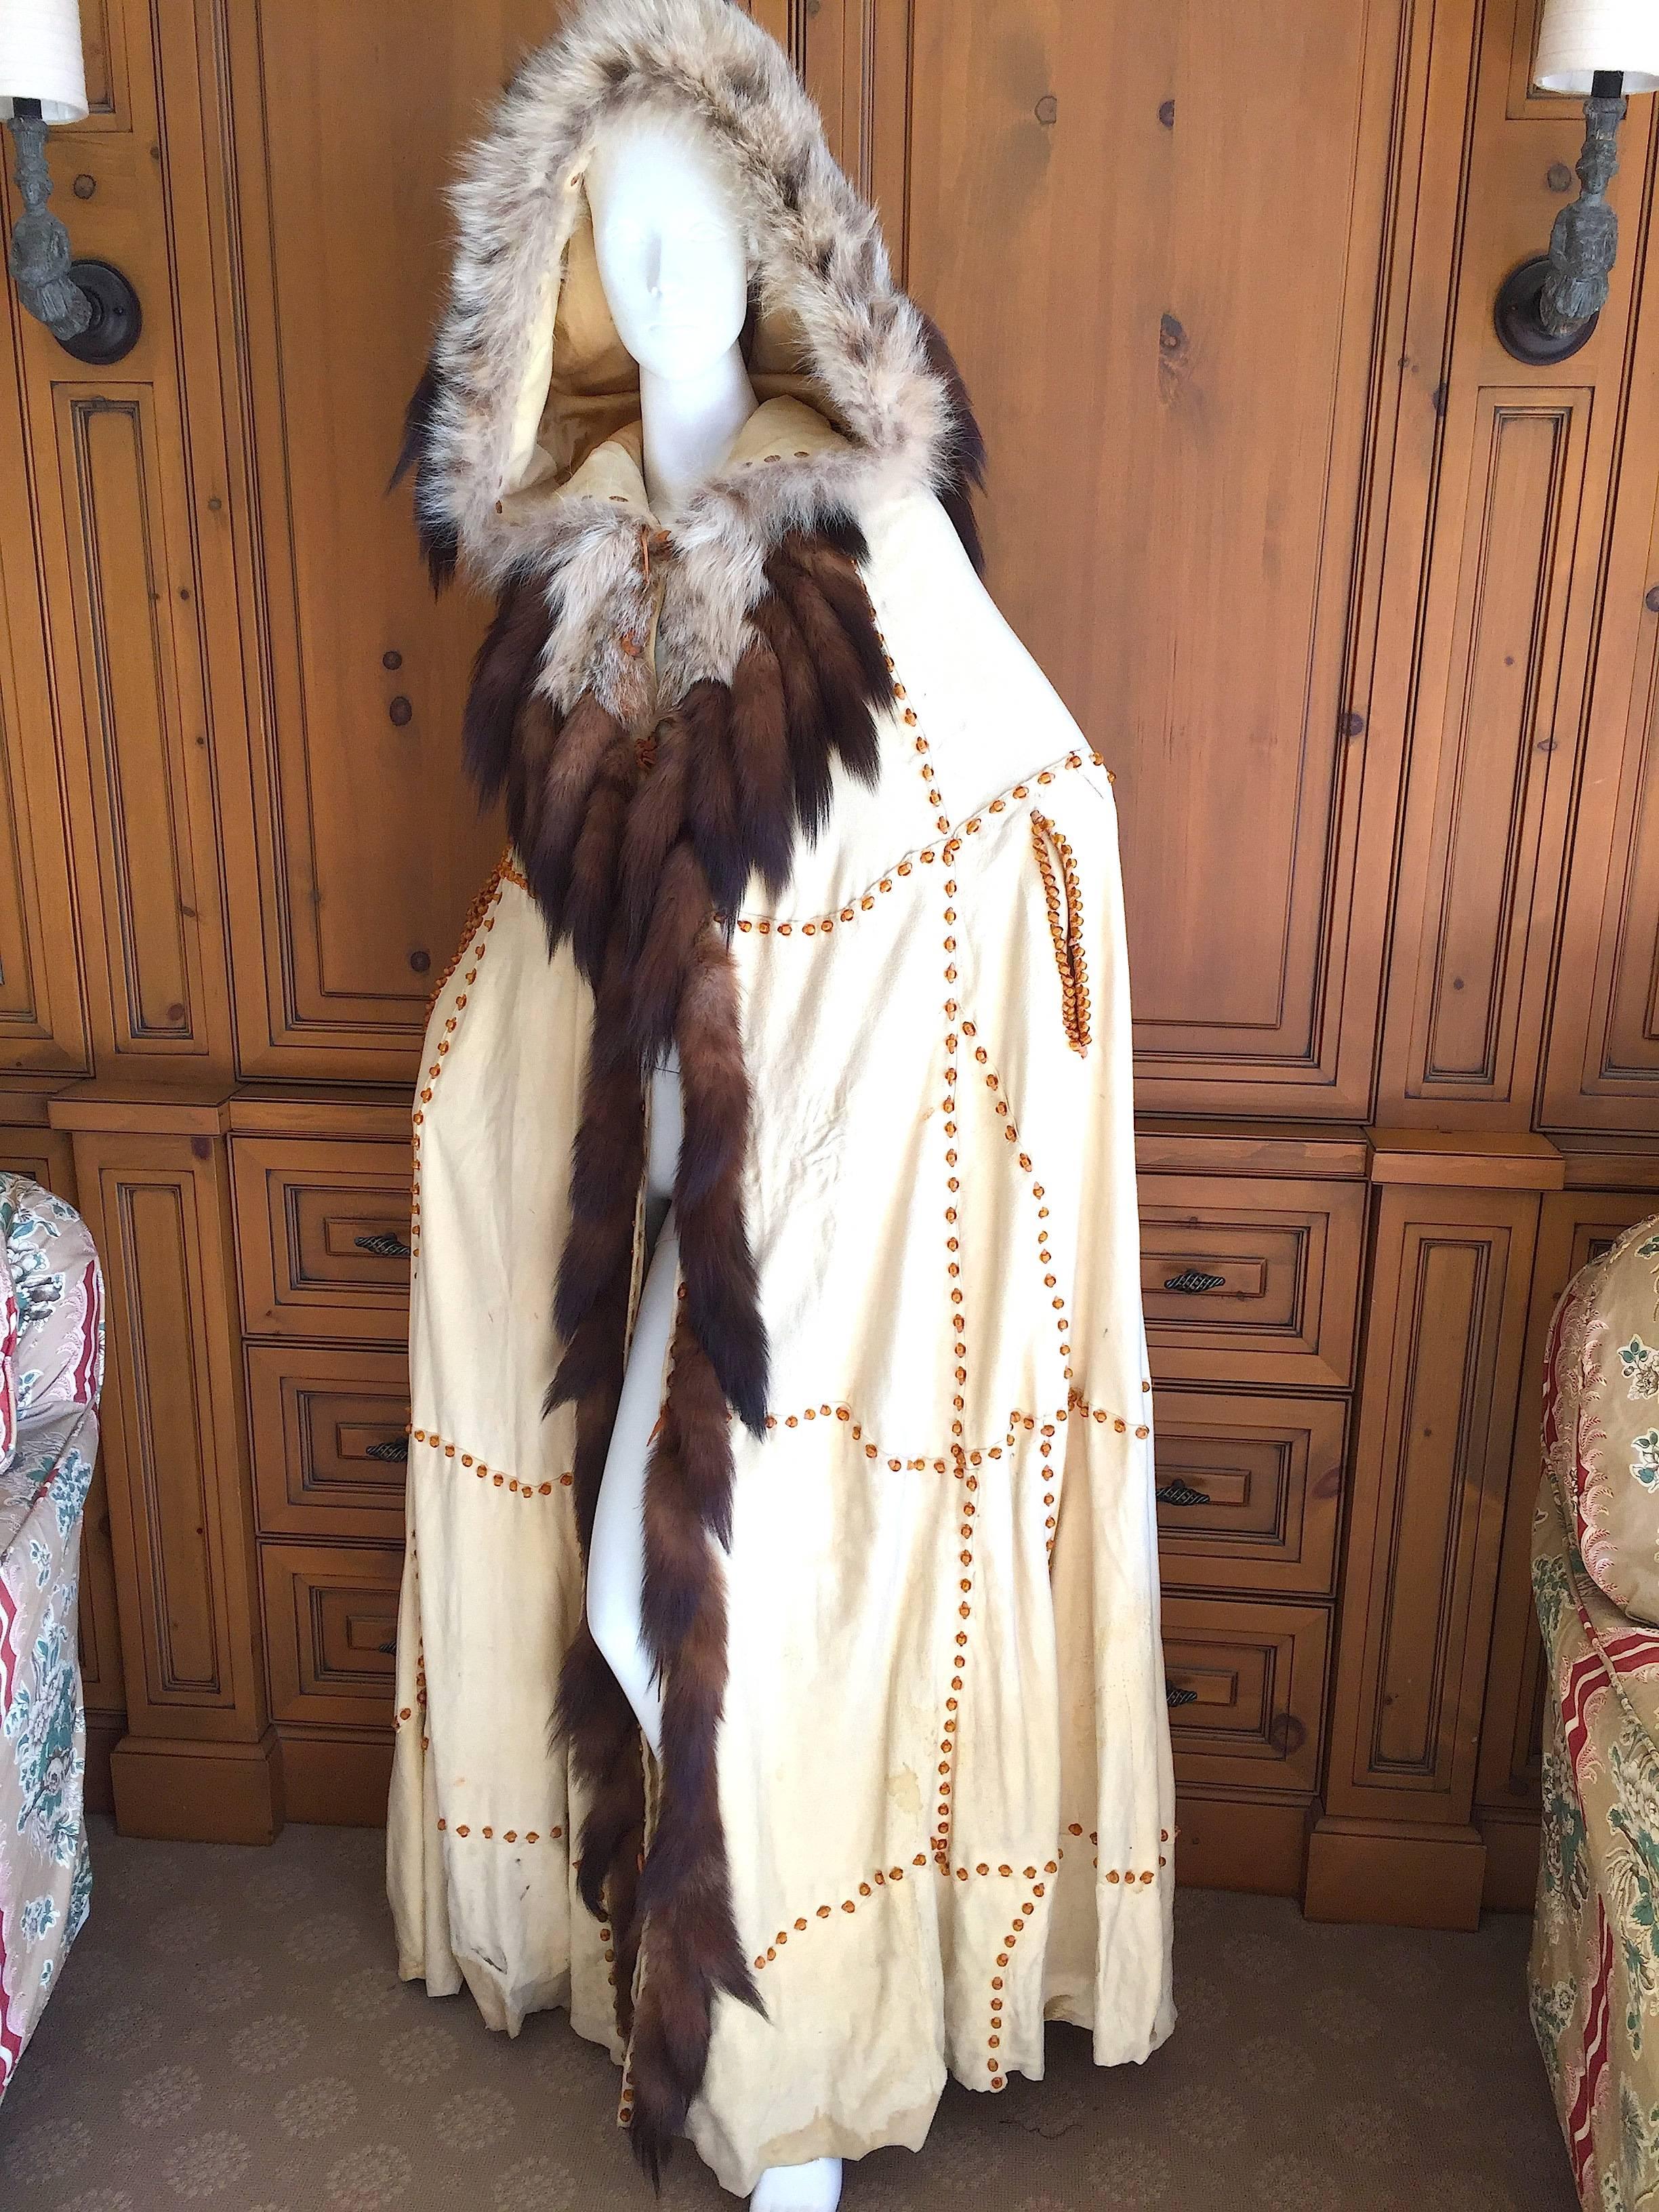 Floor sweeping deerskin cape embellished with fox and sable tails, this is quite the Wild West entrance maker.
From a wonderful gal who made her home in Aspen, truly for the western princess.
Bold topaz color glass beads crisscross this great